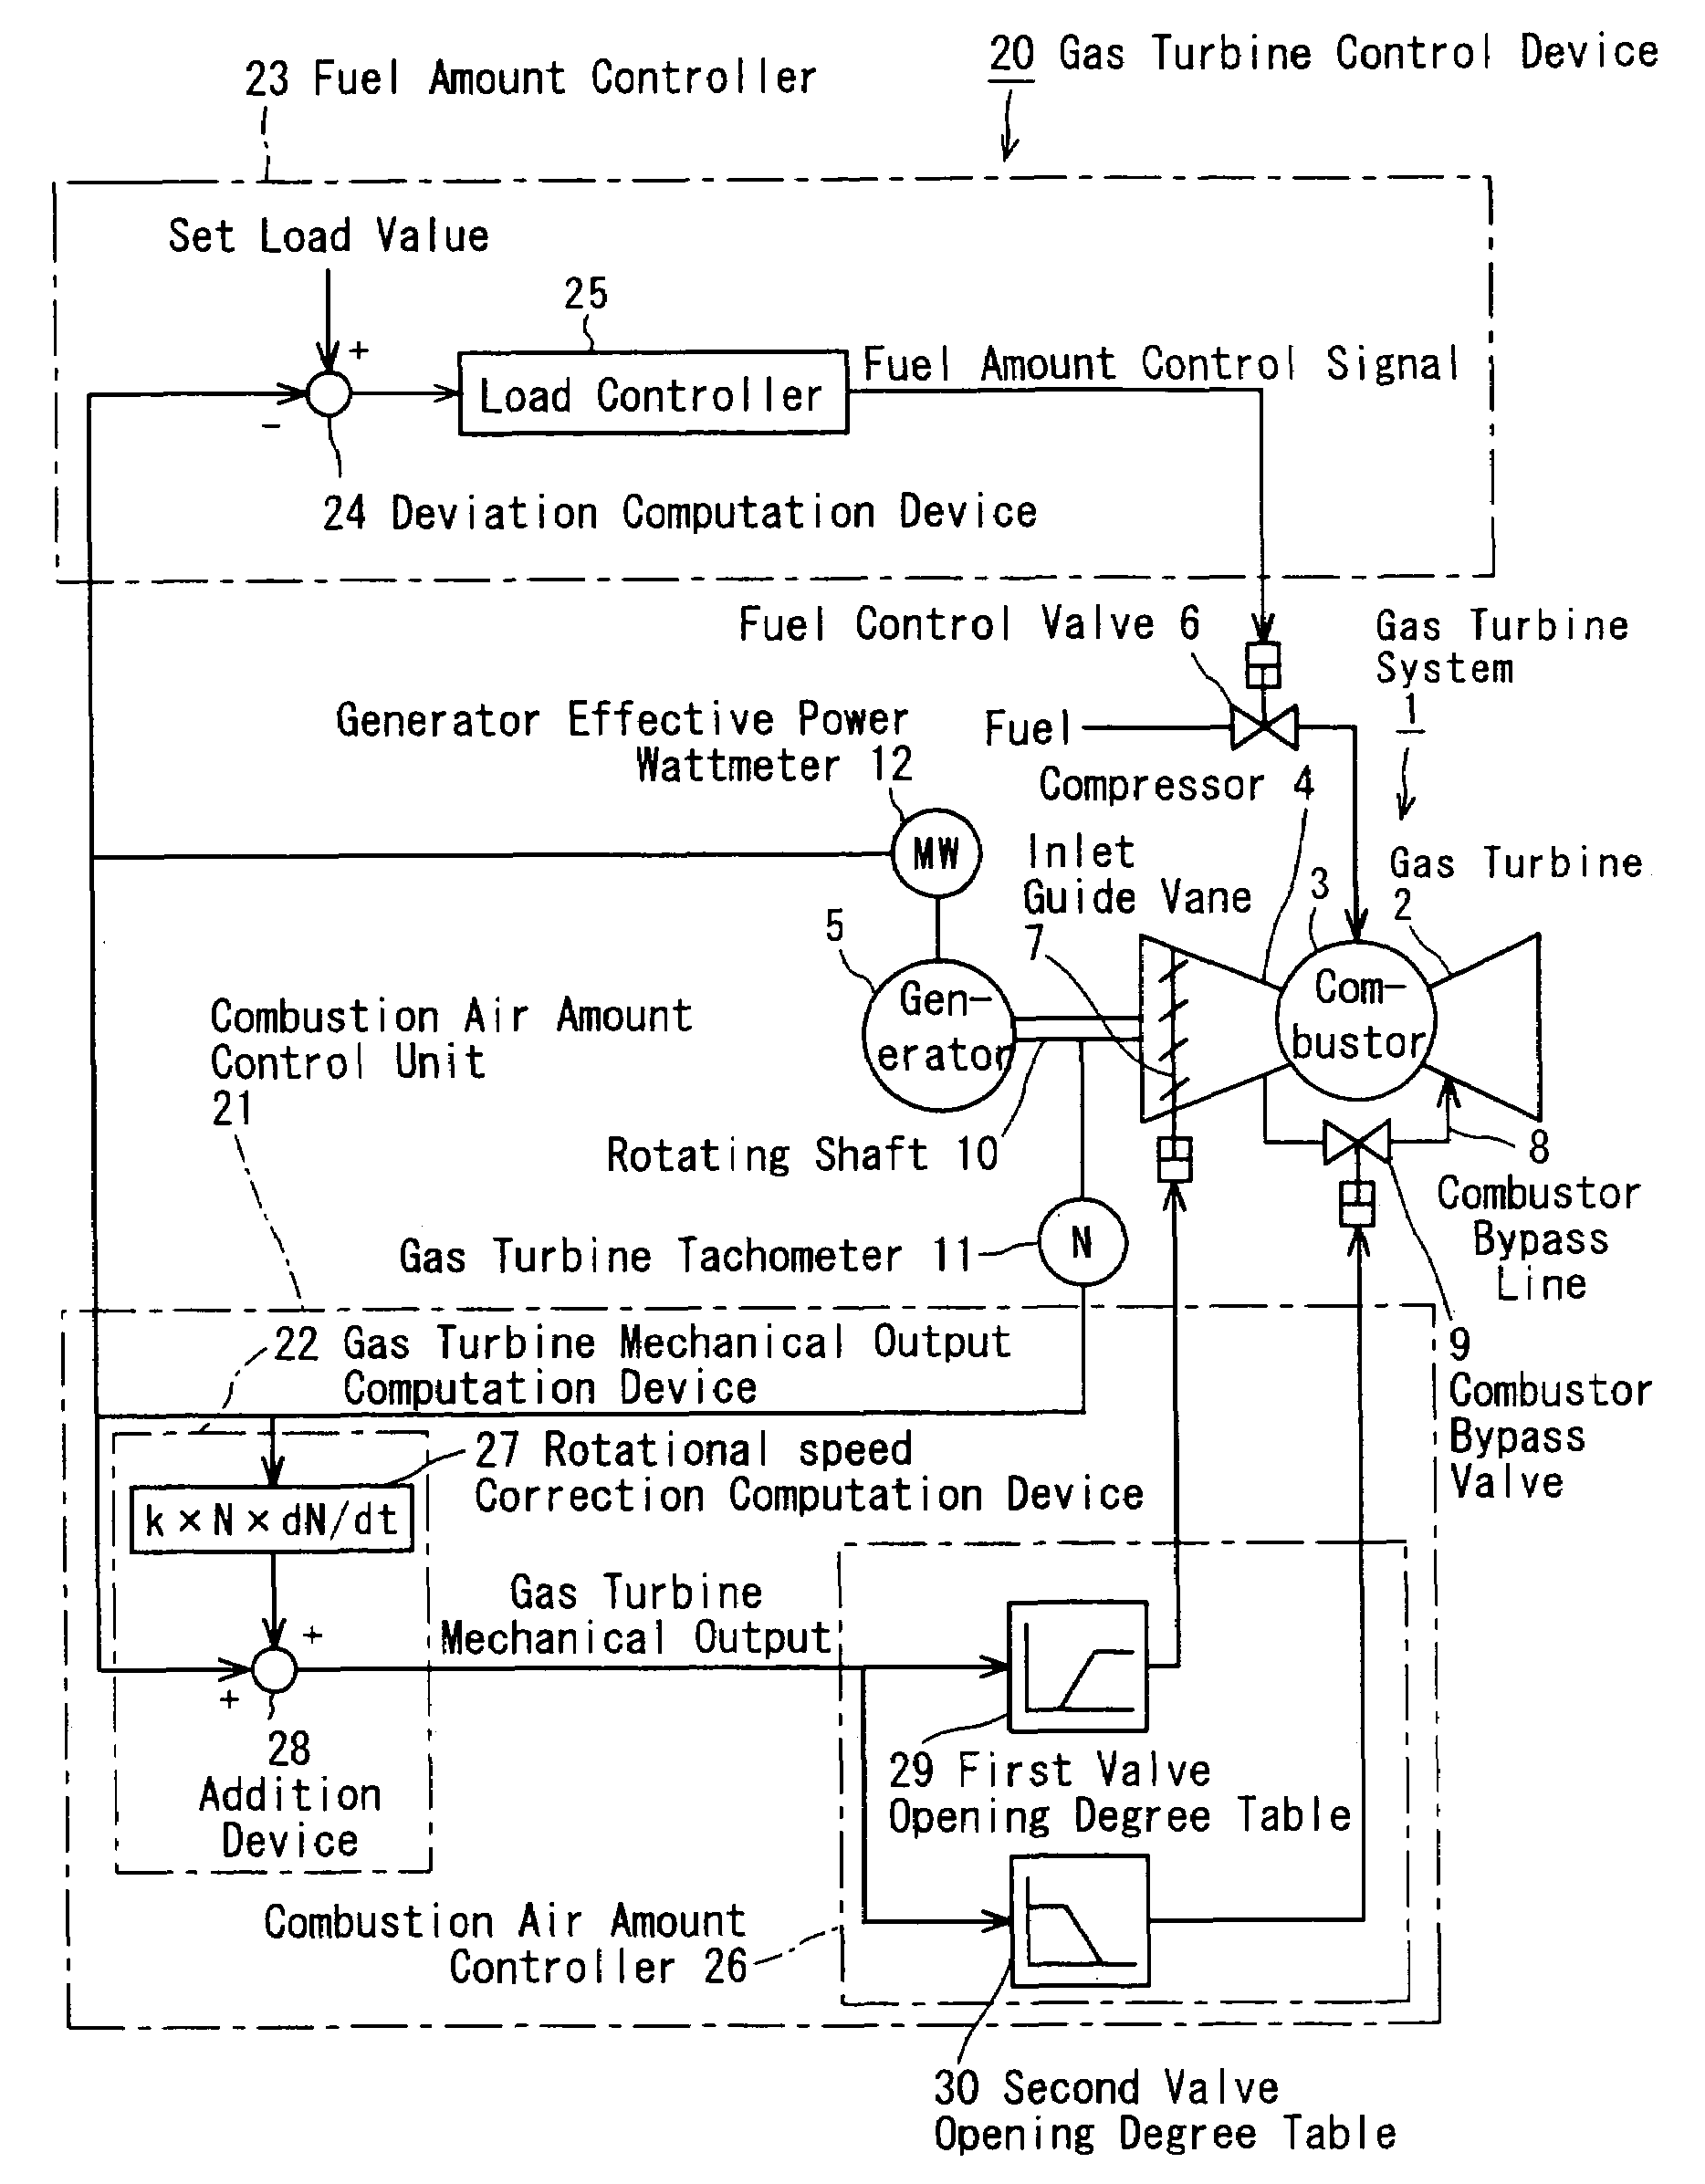 Turbine mechanical output computation device and gas turbine control device equipped therewith